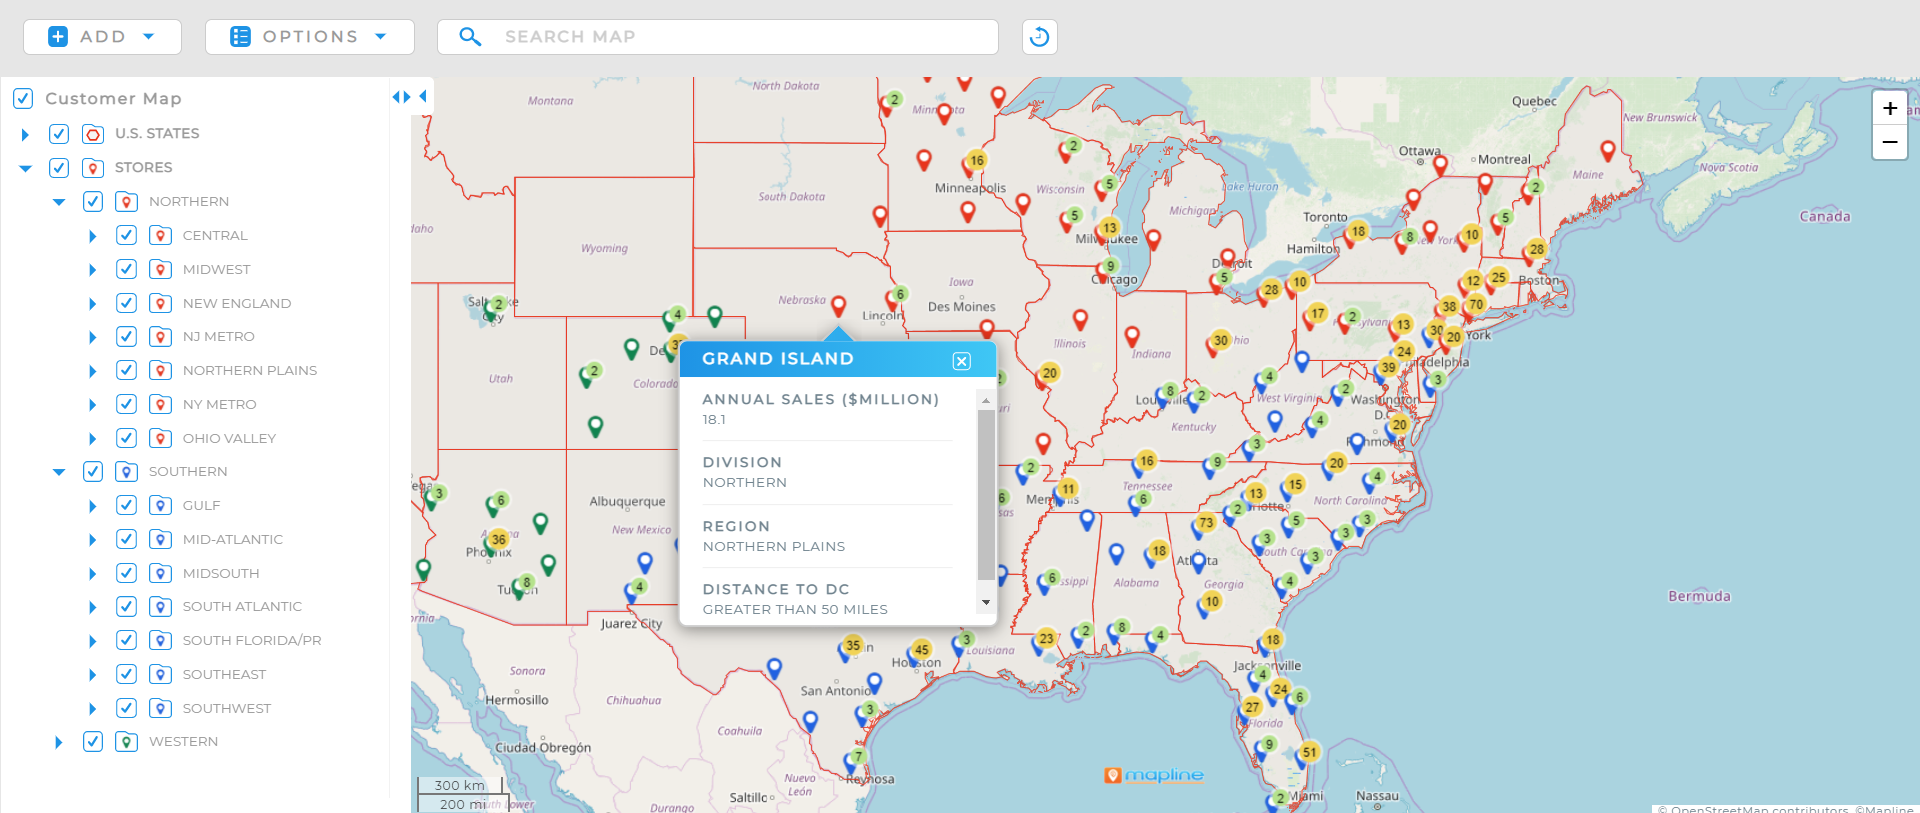 Map customer locations, distribution centers, franchises and more. Visualize your data in a real-world context to gain more insights into your business.